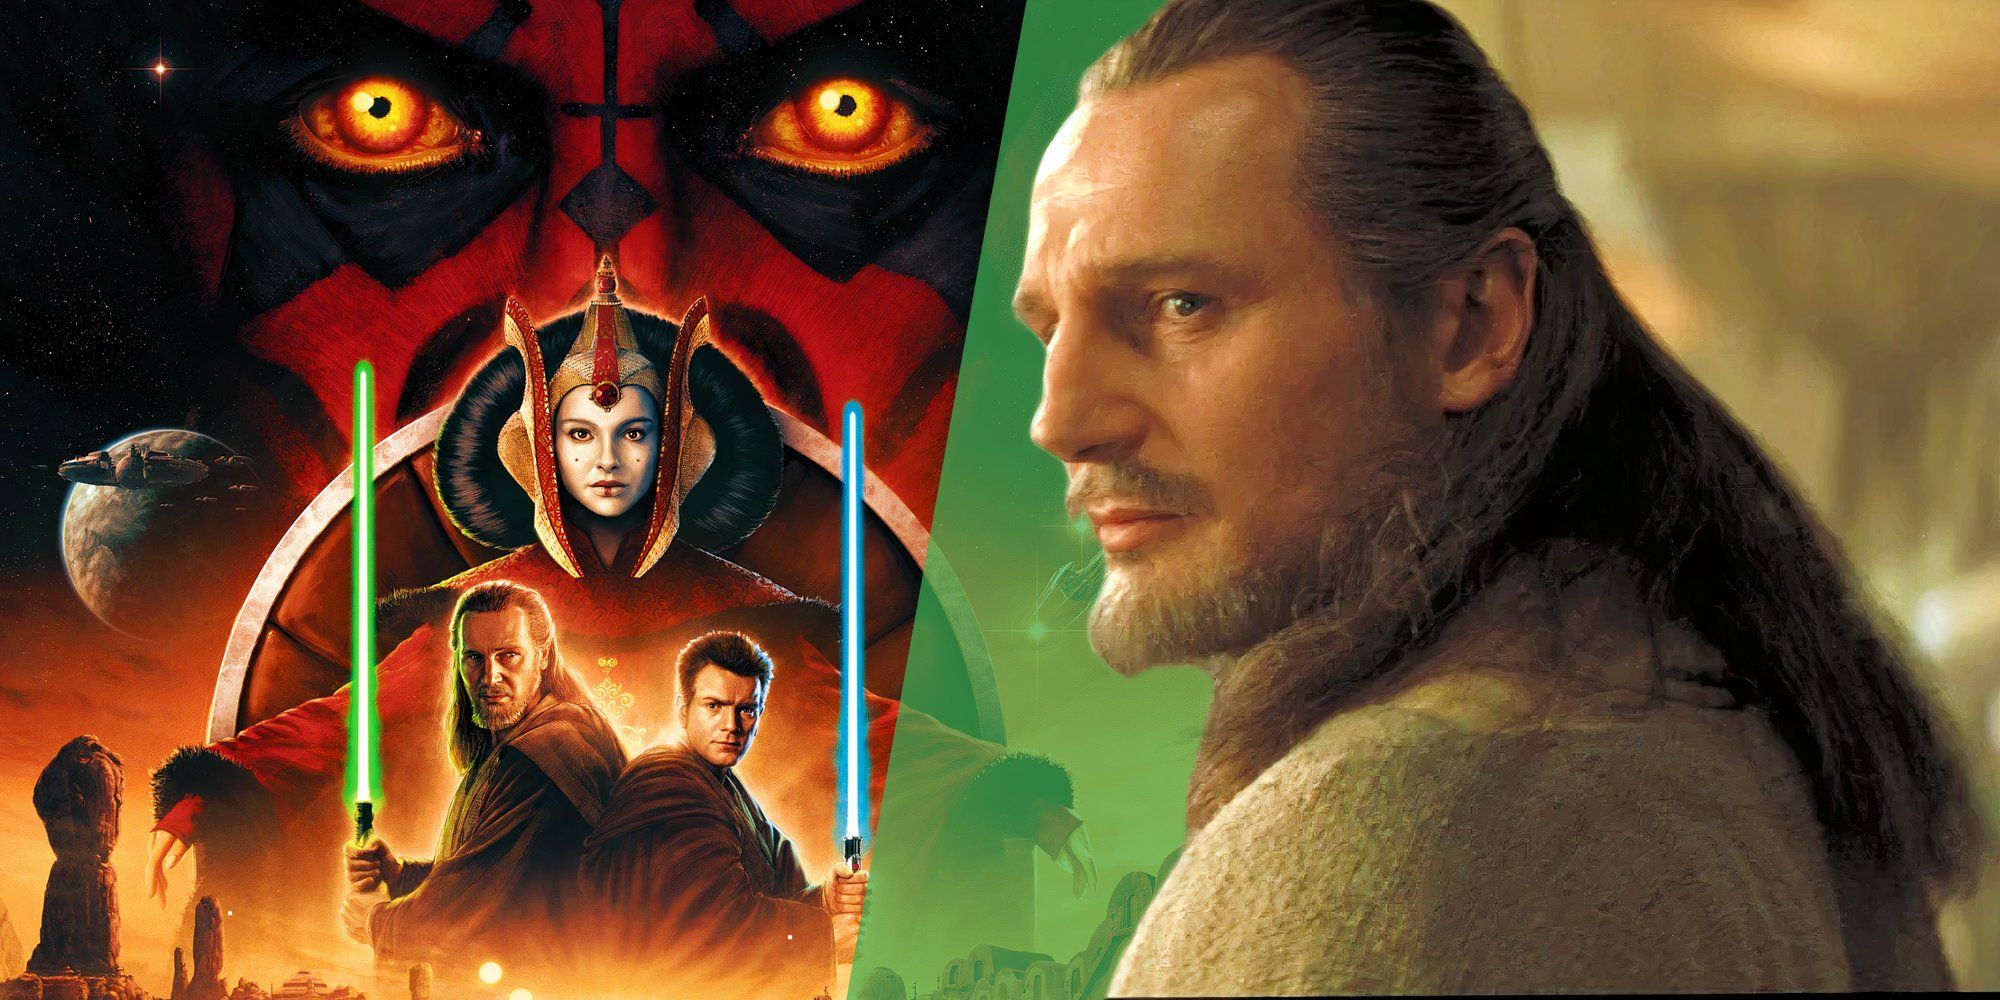 The poster for the 25th anniversary of Star Wars: The Phantom Menace (1999) next to Liam Neeson as Qui-Gon Jinn